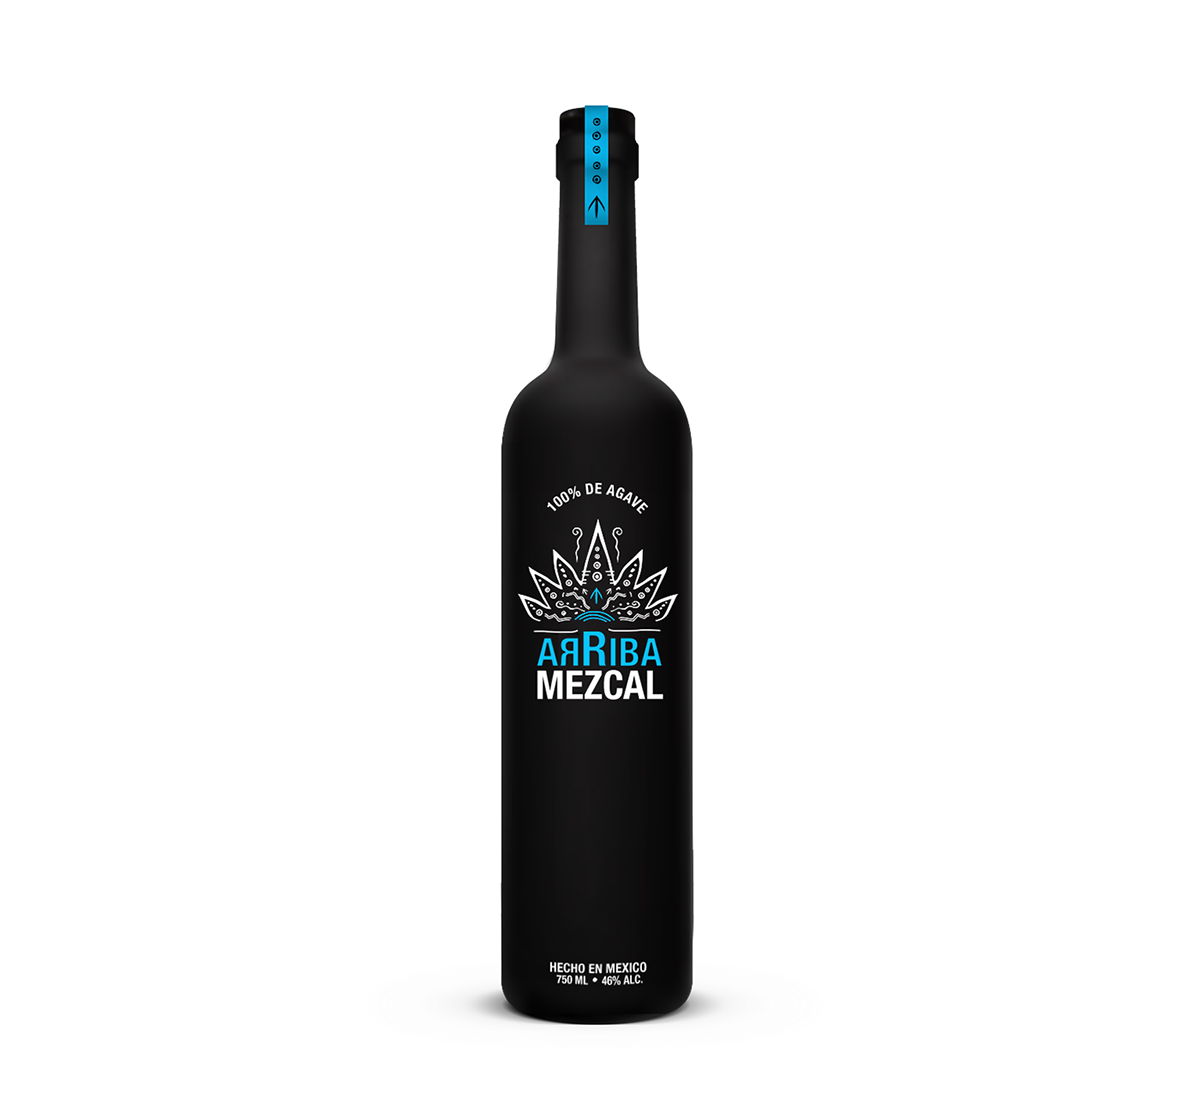 Mezcal design Label Tequila Mexican mexico mezcal spirit bottle packaging design label design packaging design traditional